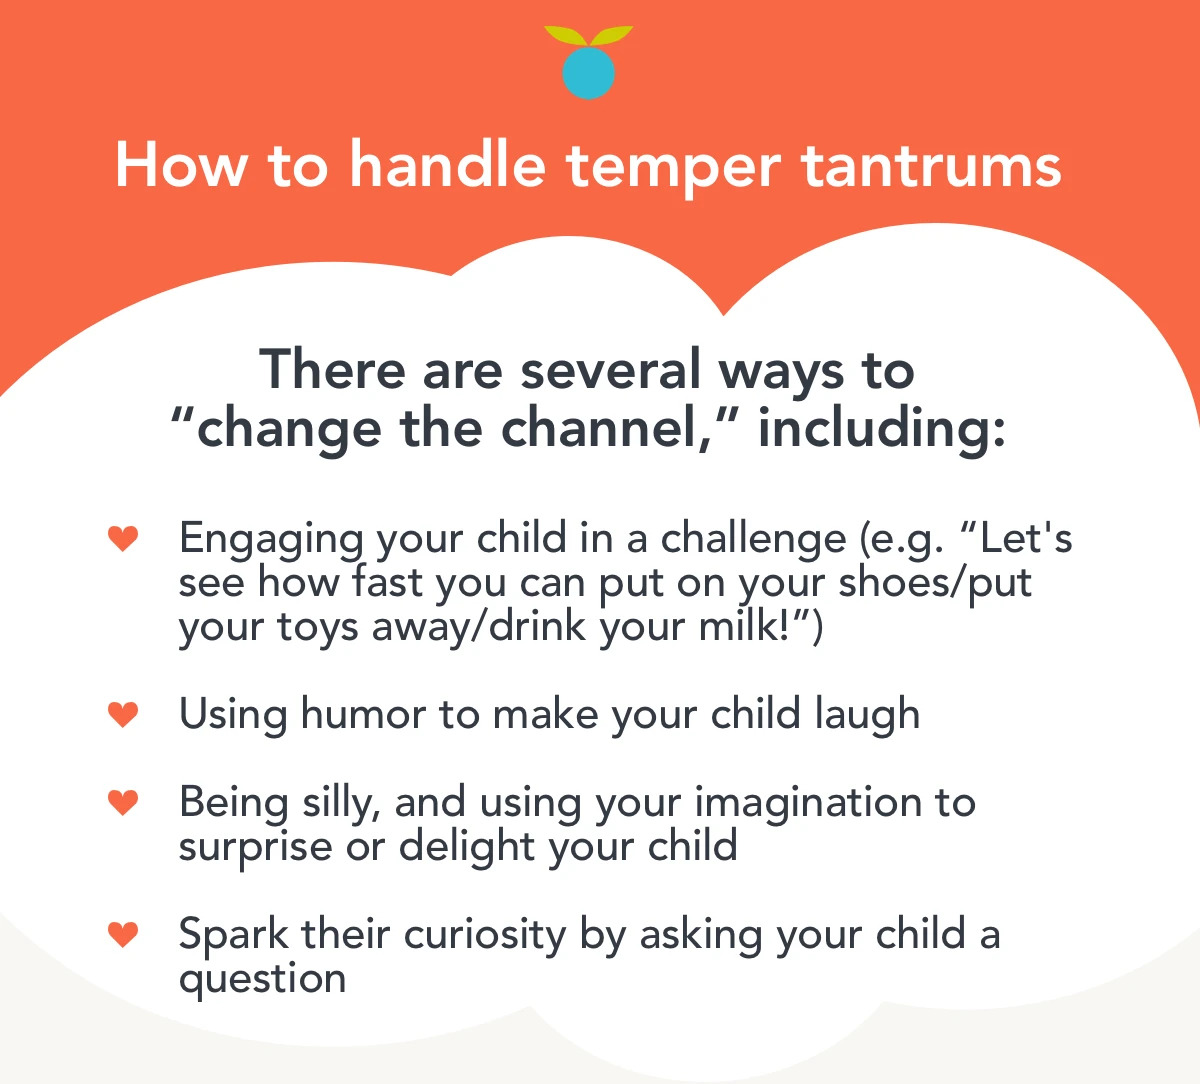 how to handle temper tantrums in the classroom